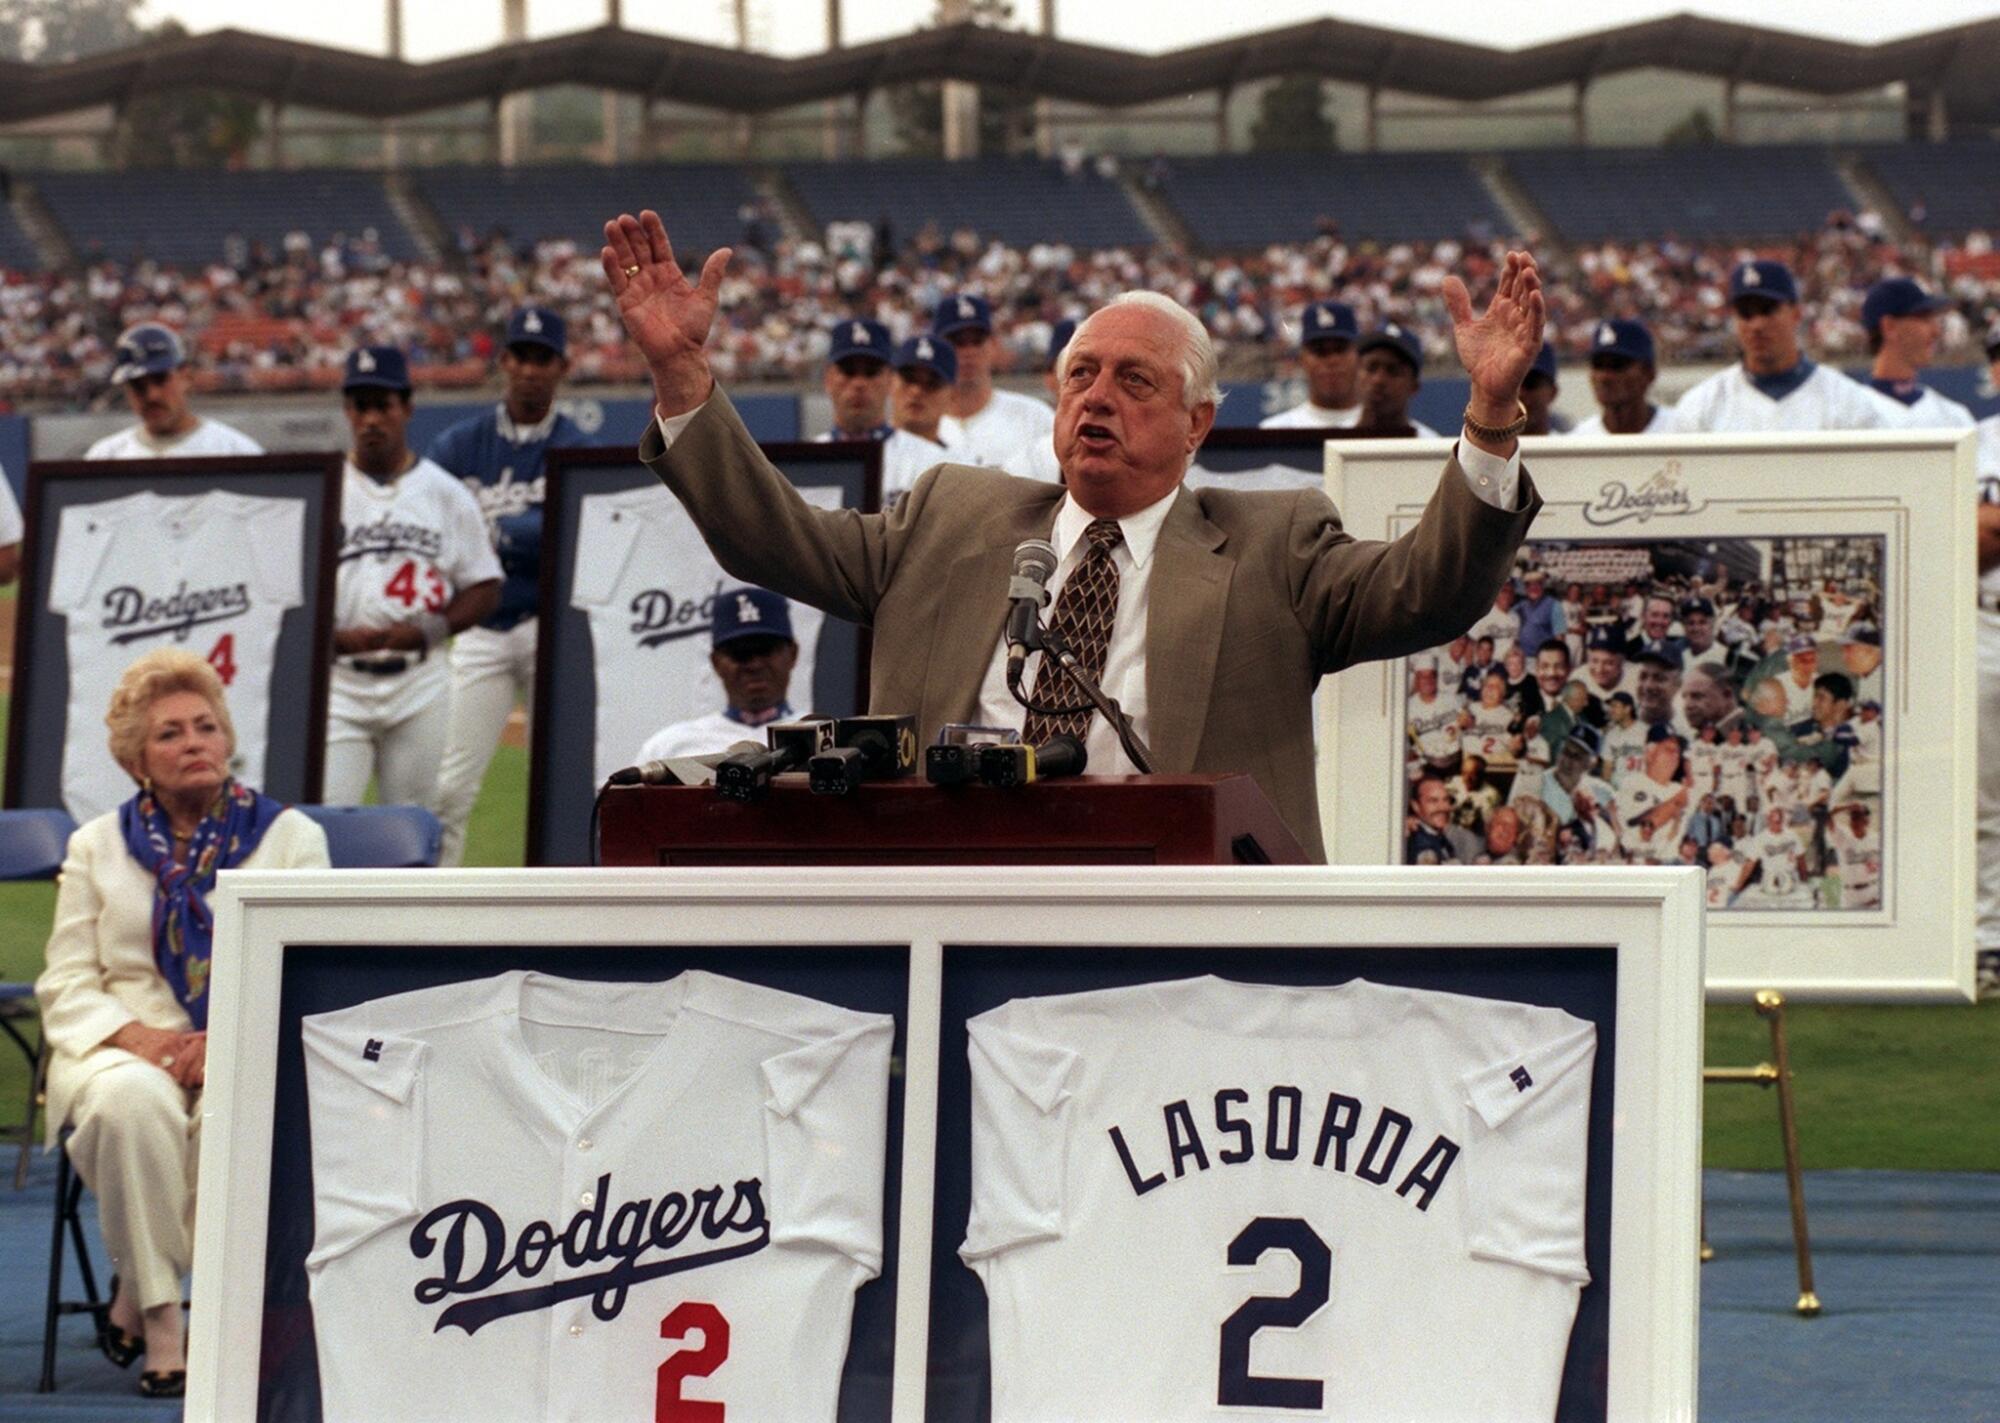 Tommy Lasorda acknowledges the crowd at Dodger Stadium as his number is retired in 1997